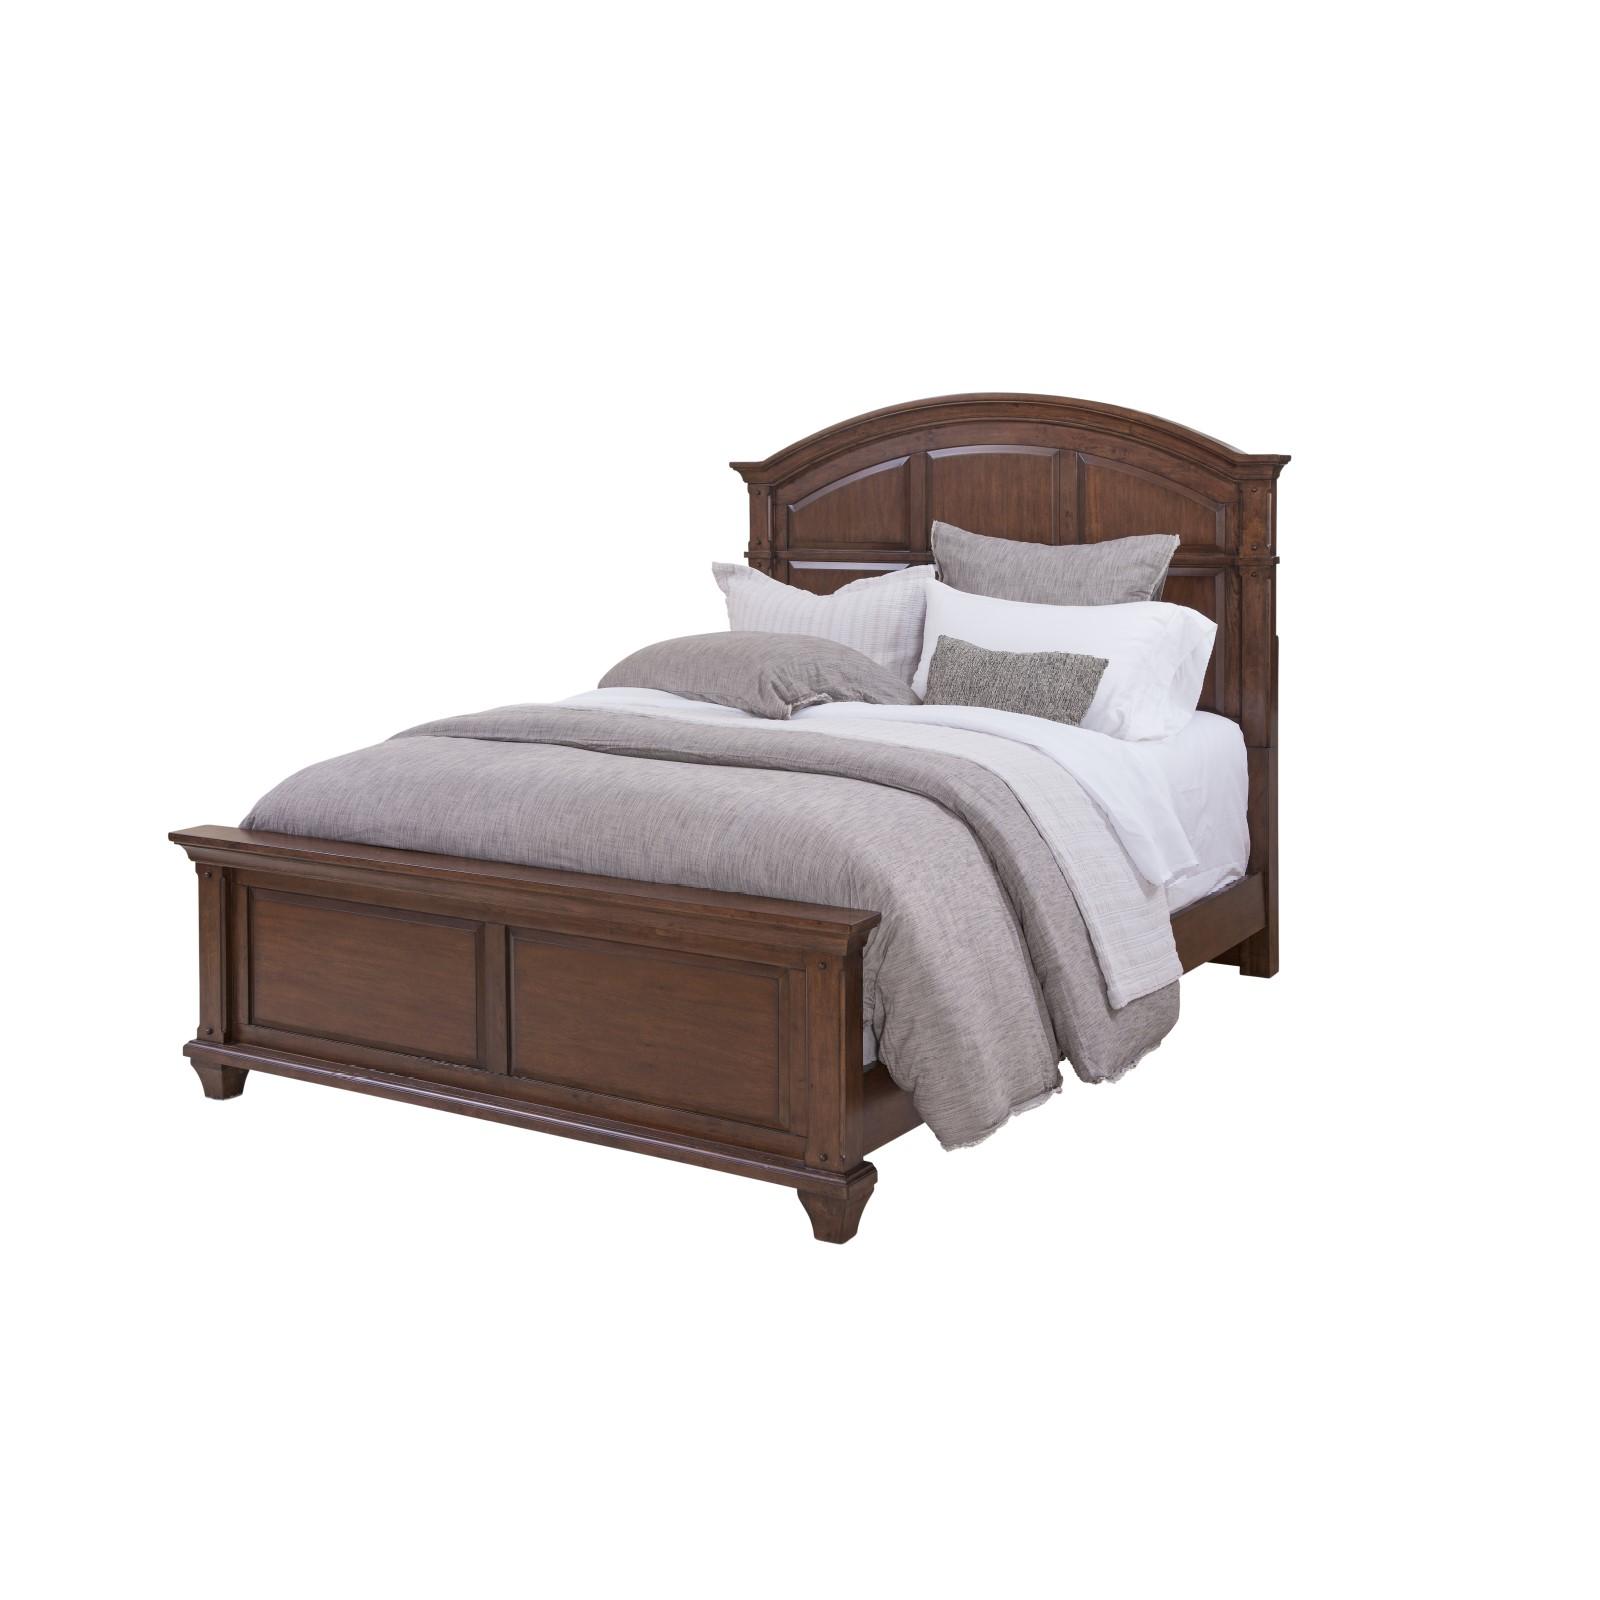 Classic, Traditional Panel Bed SEDONA 2400-50PAN 2400-50PAN in Cherry 